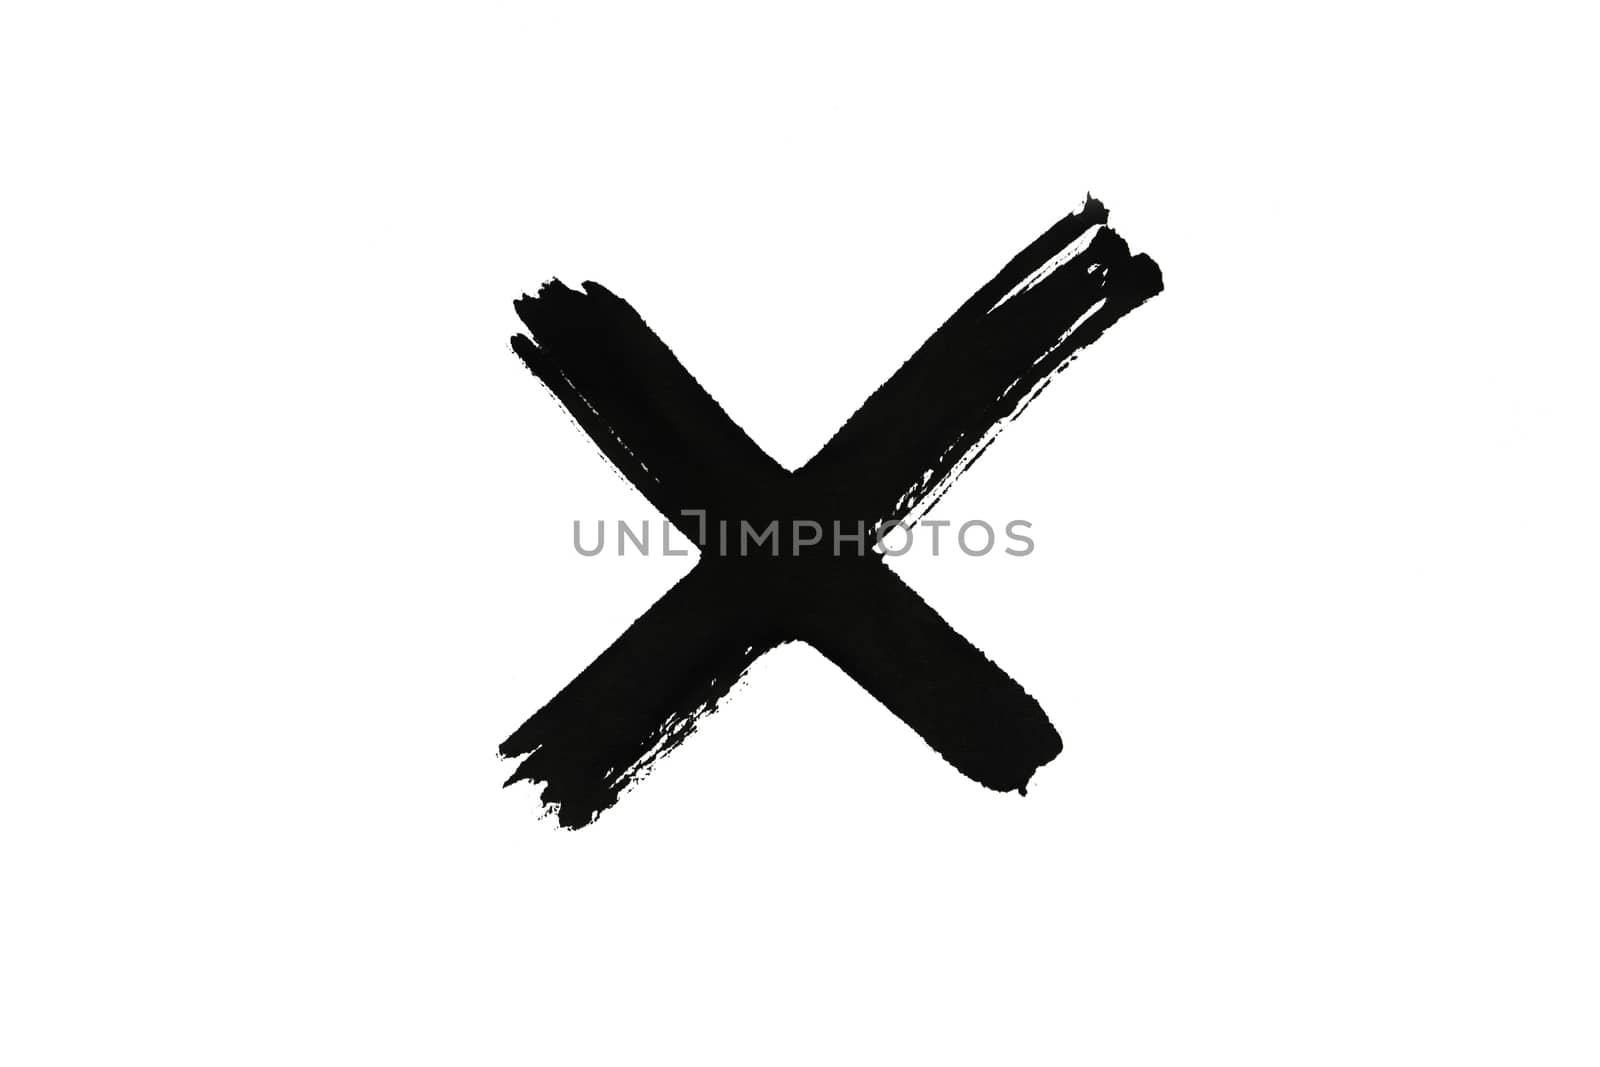 Abstract Ink cross isolate on white background